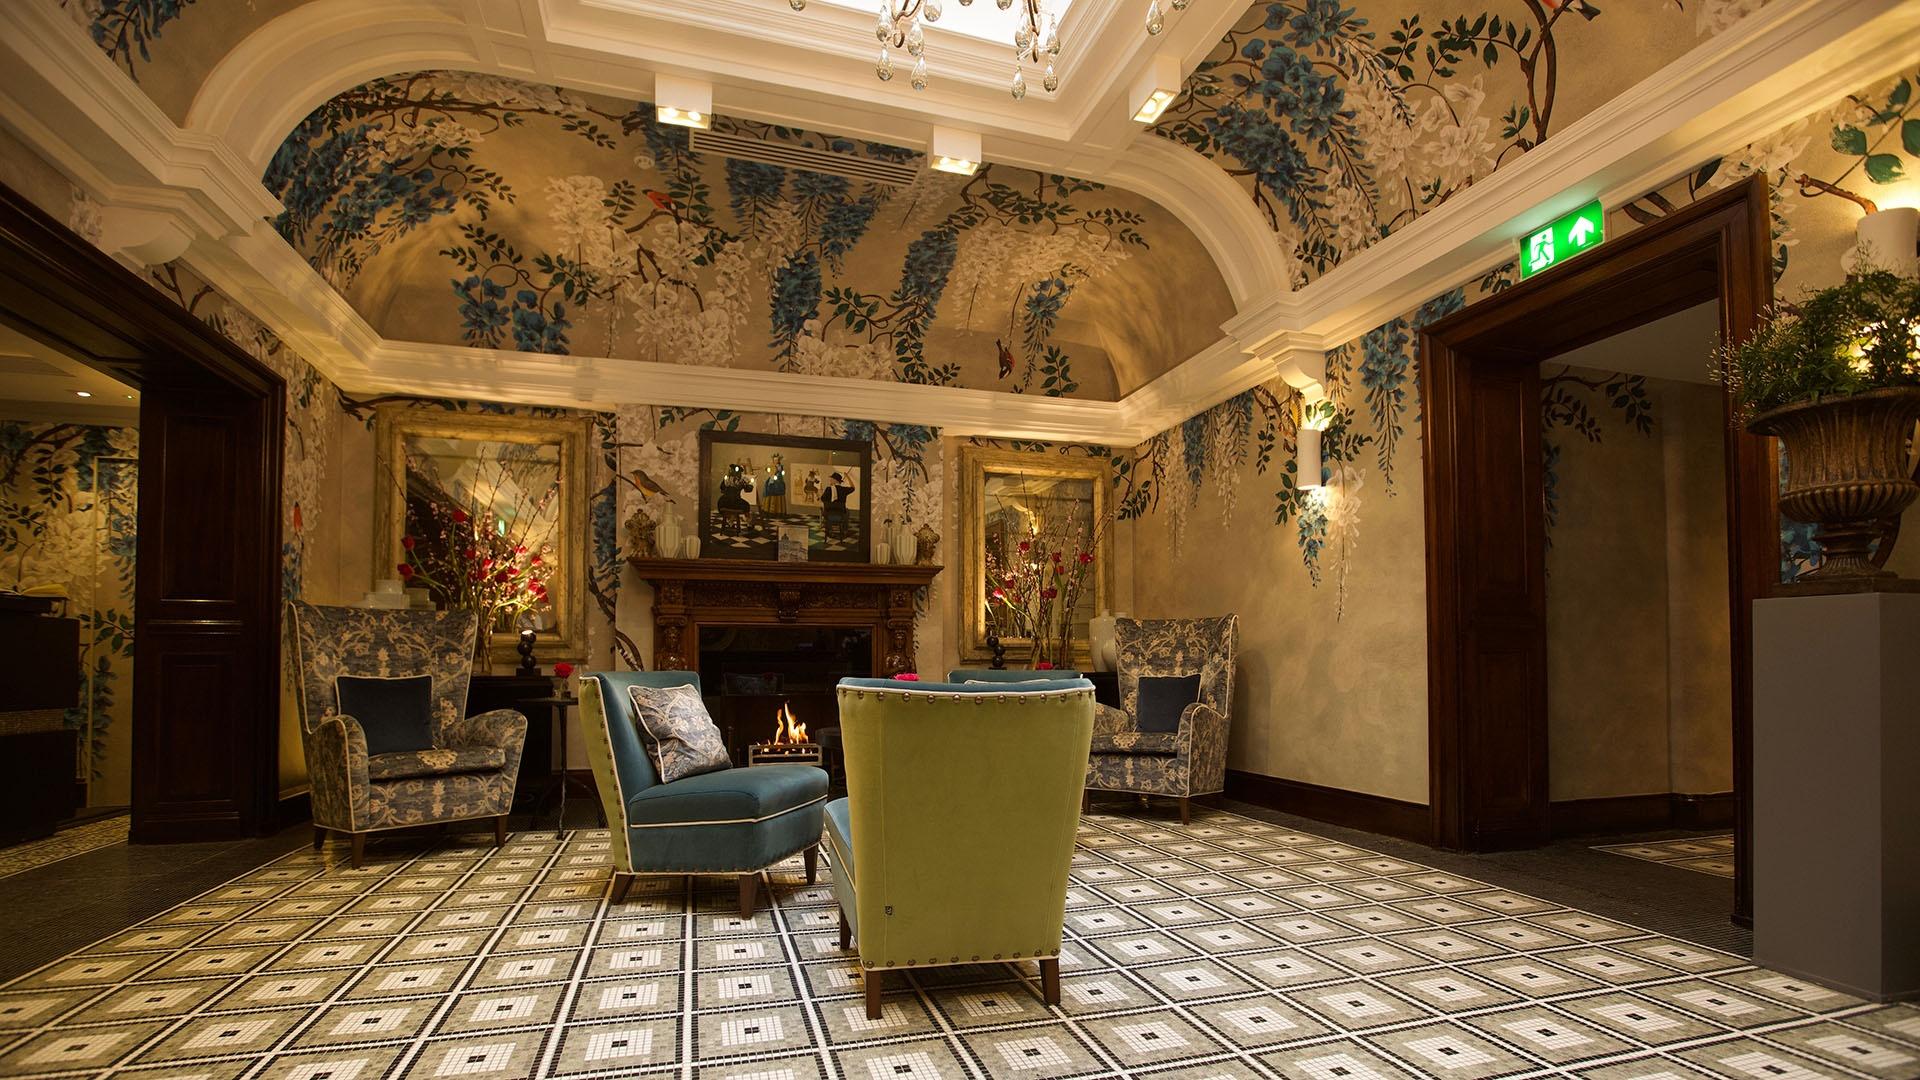 Image of the reception area at Brown's Hotel, Agatha Christie's favorite hotel in Mayfair, London.